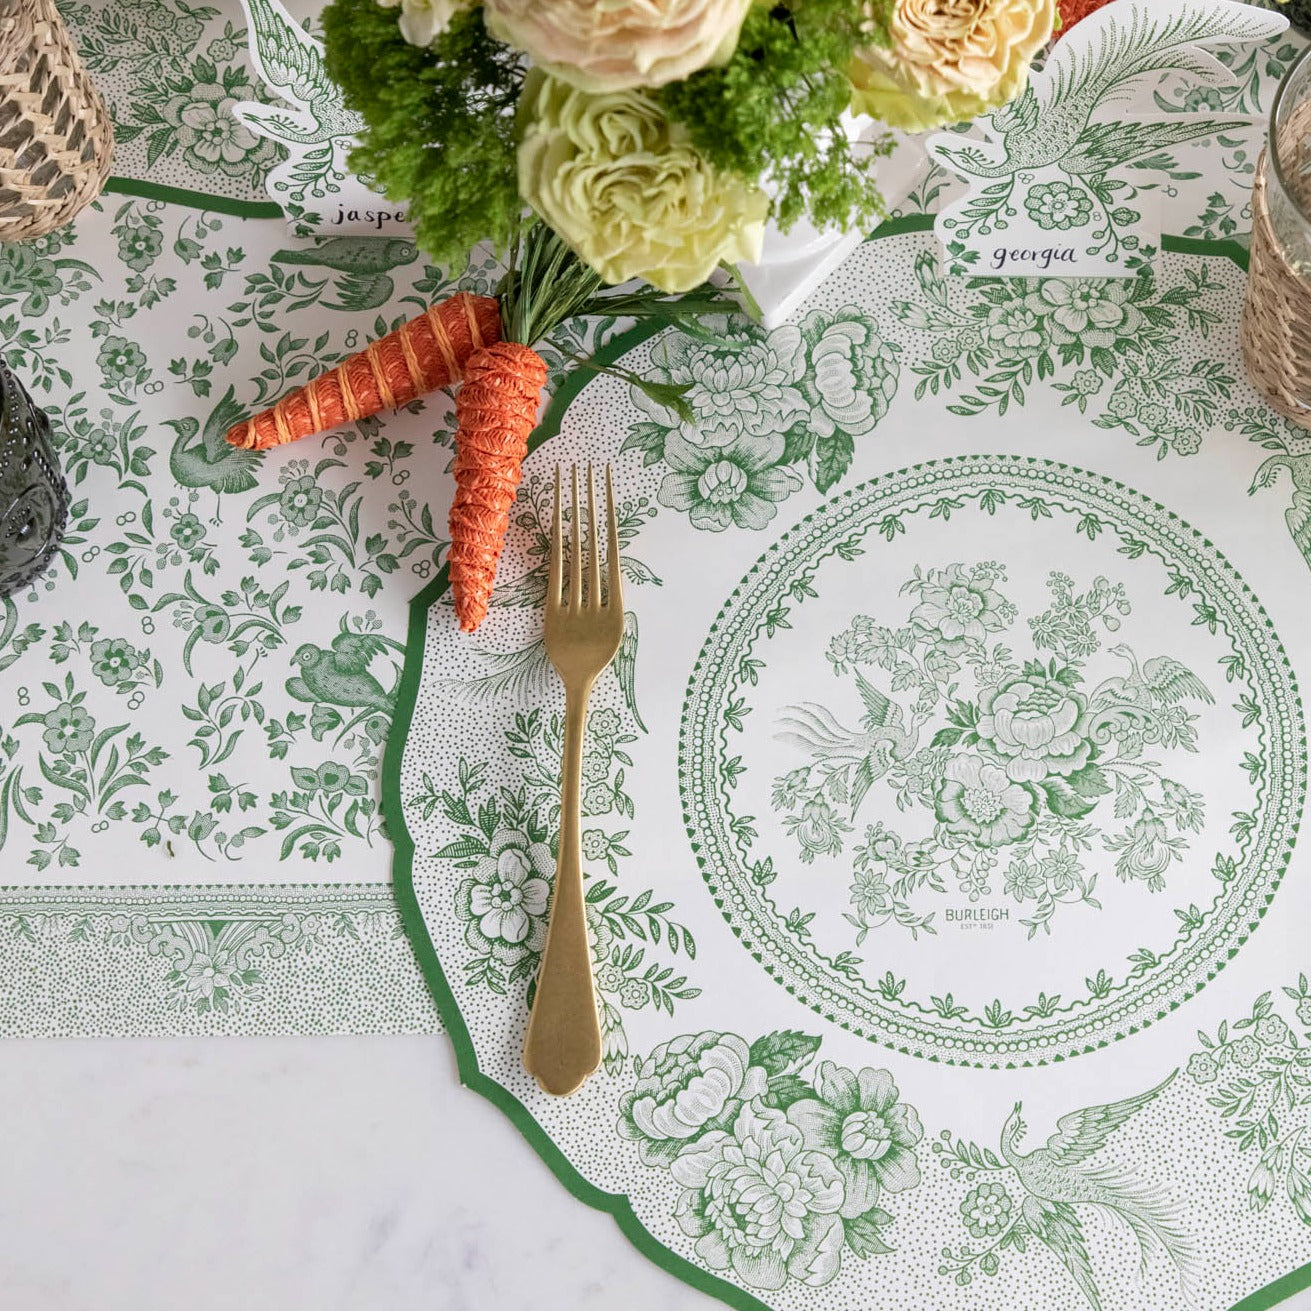 The Green Regal Peacock Runner under an elegant springtime place setting sans plate, from above.